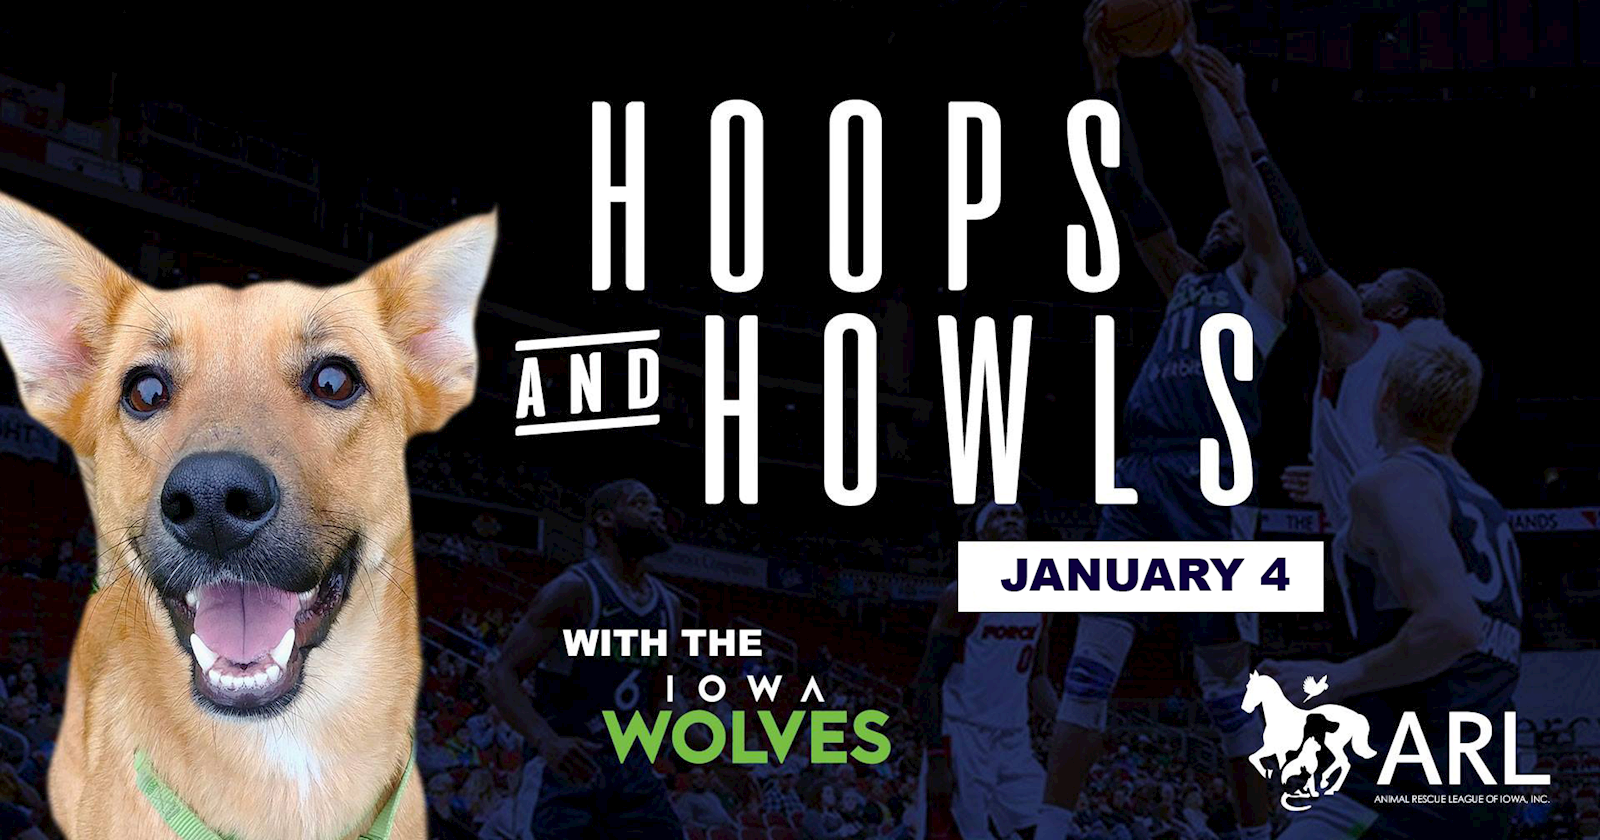 Hoops and Howls